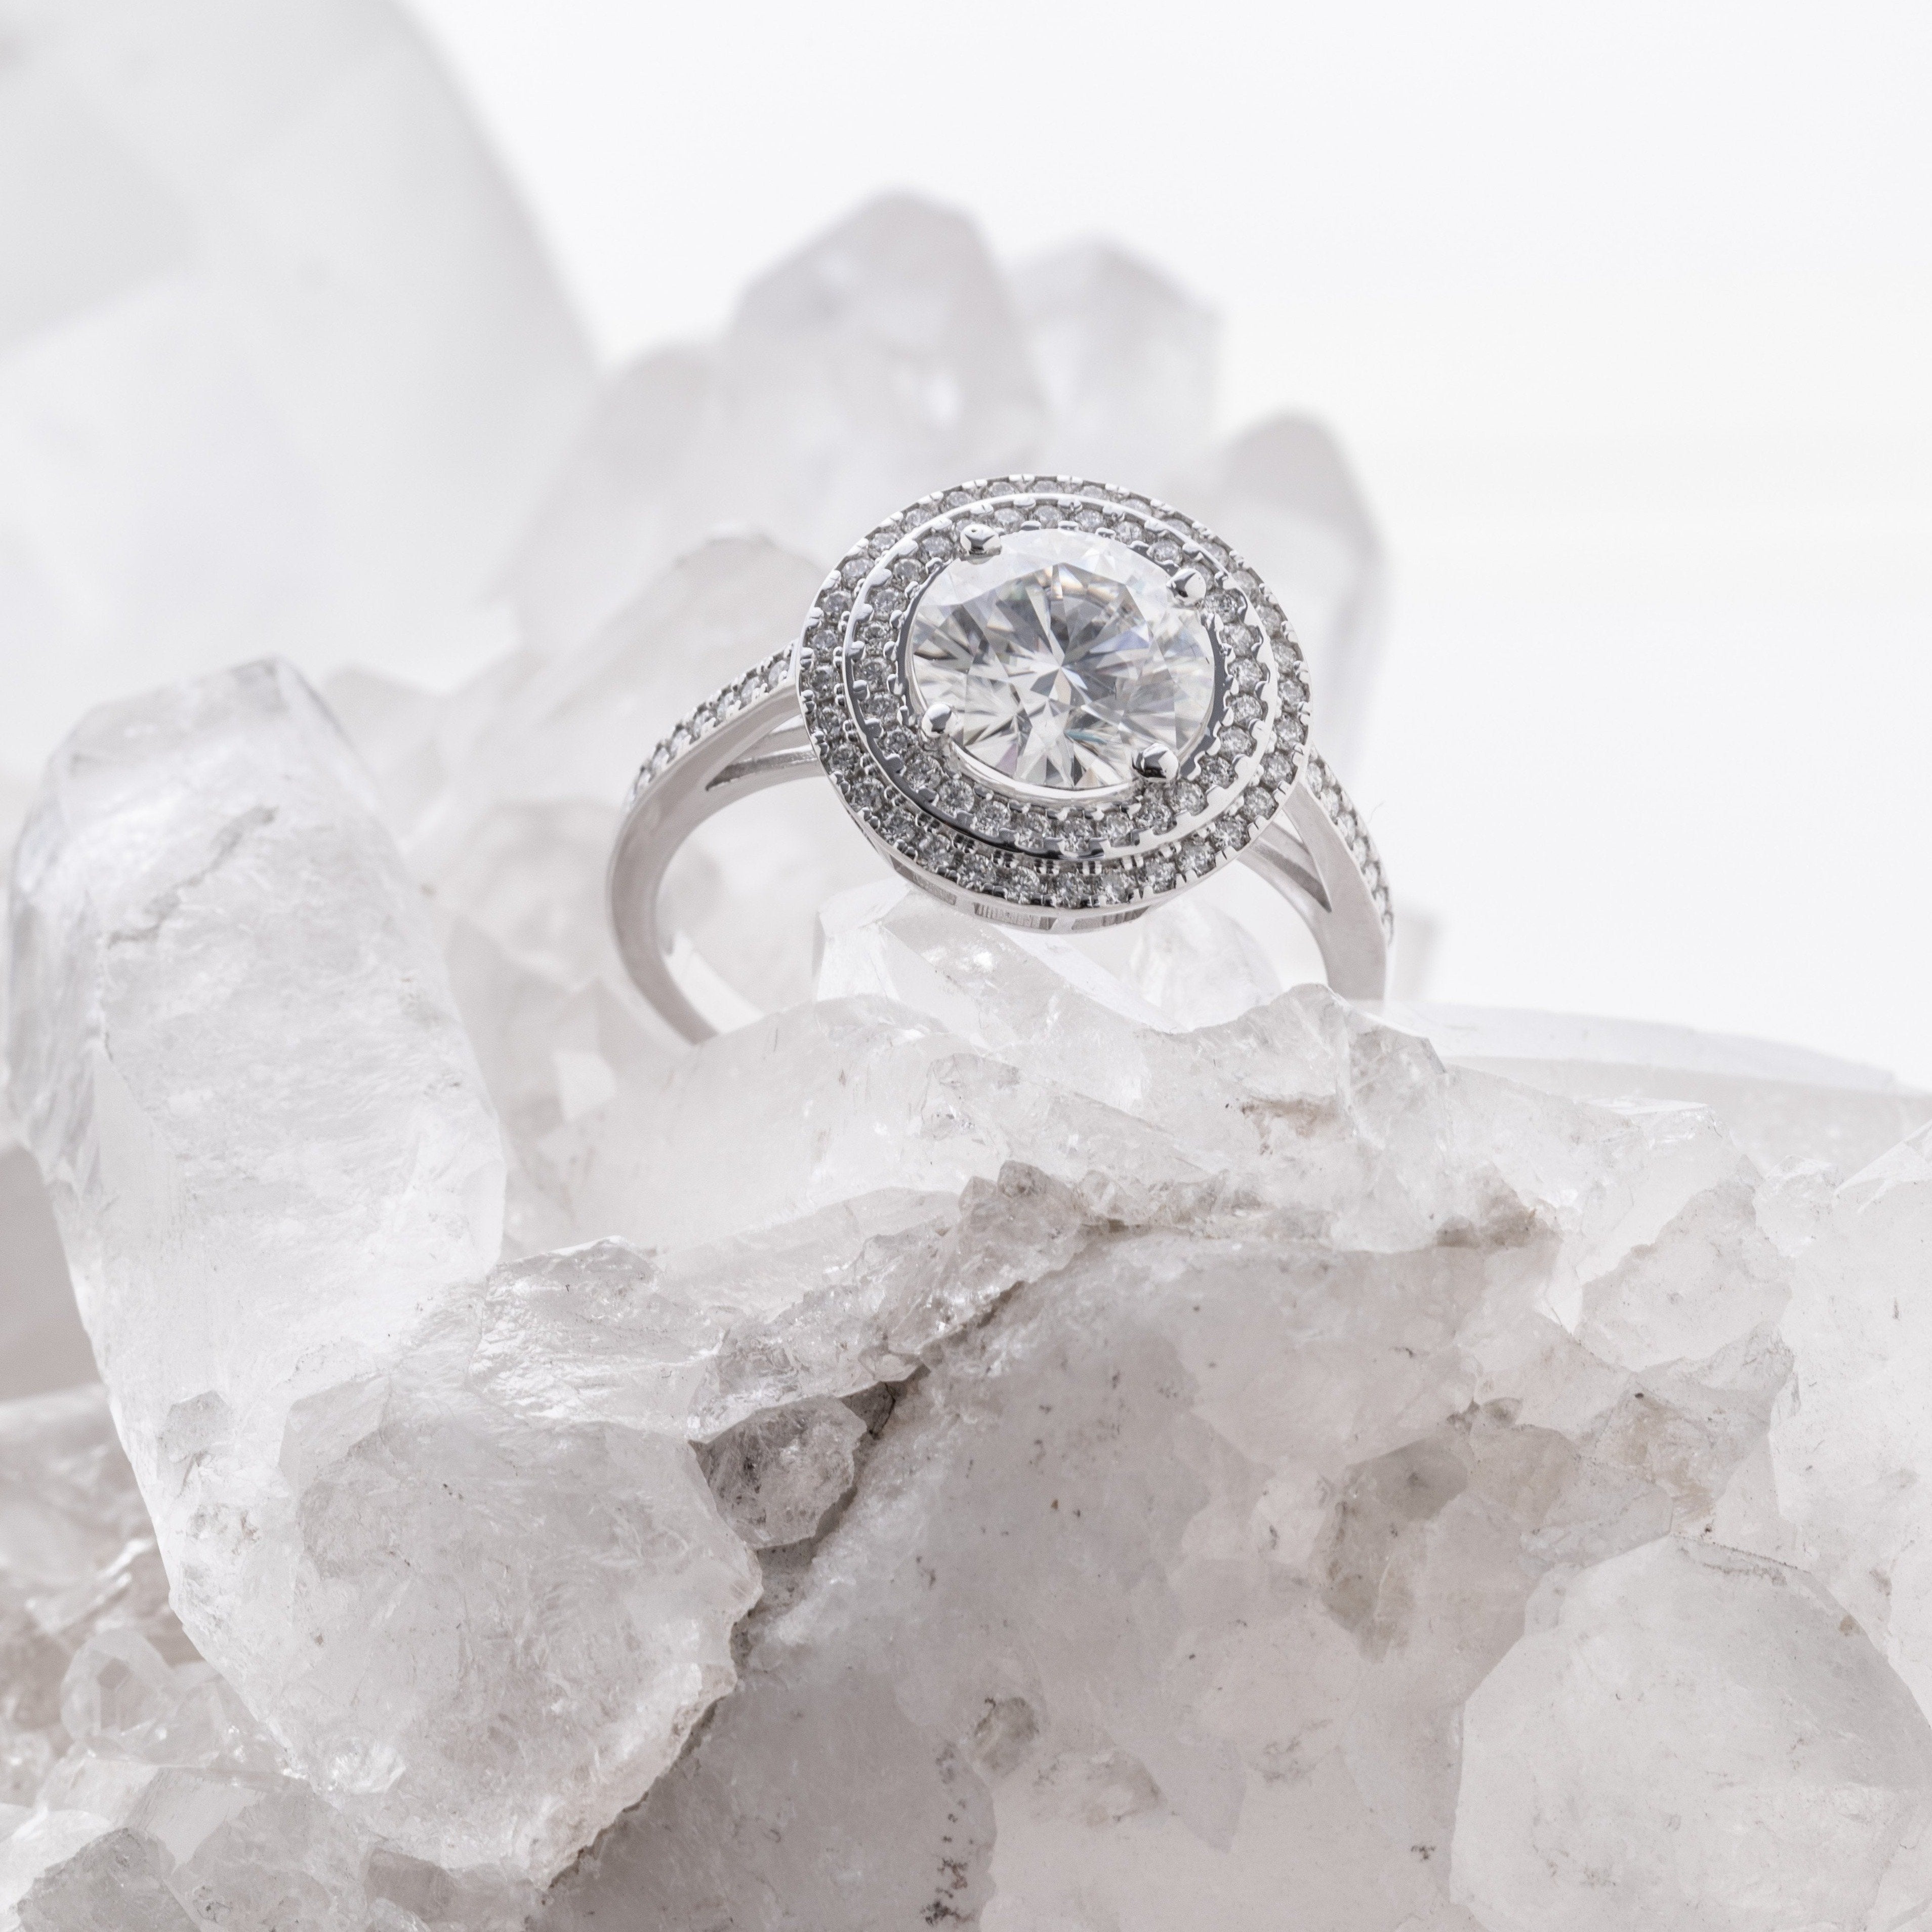 Our Guide to Ethical Engagement Rings